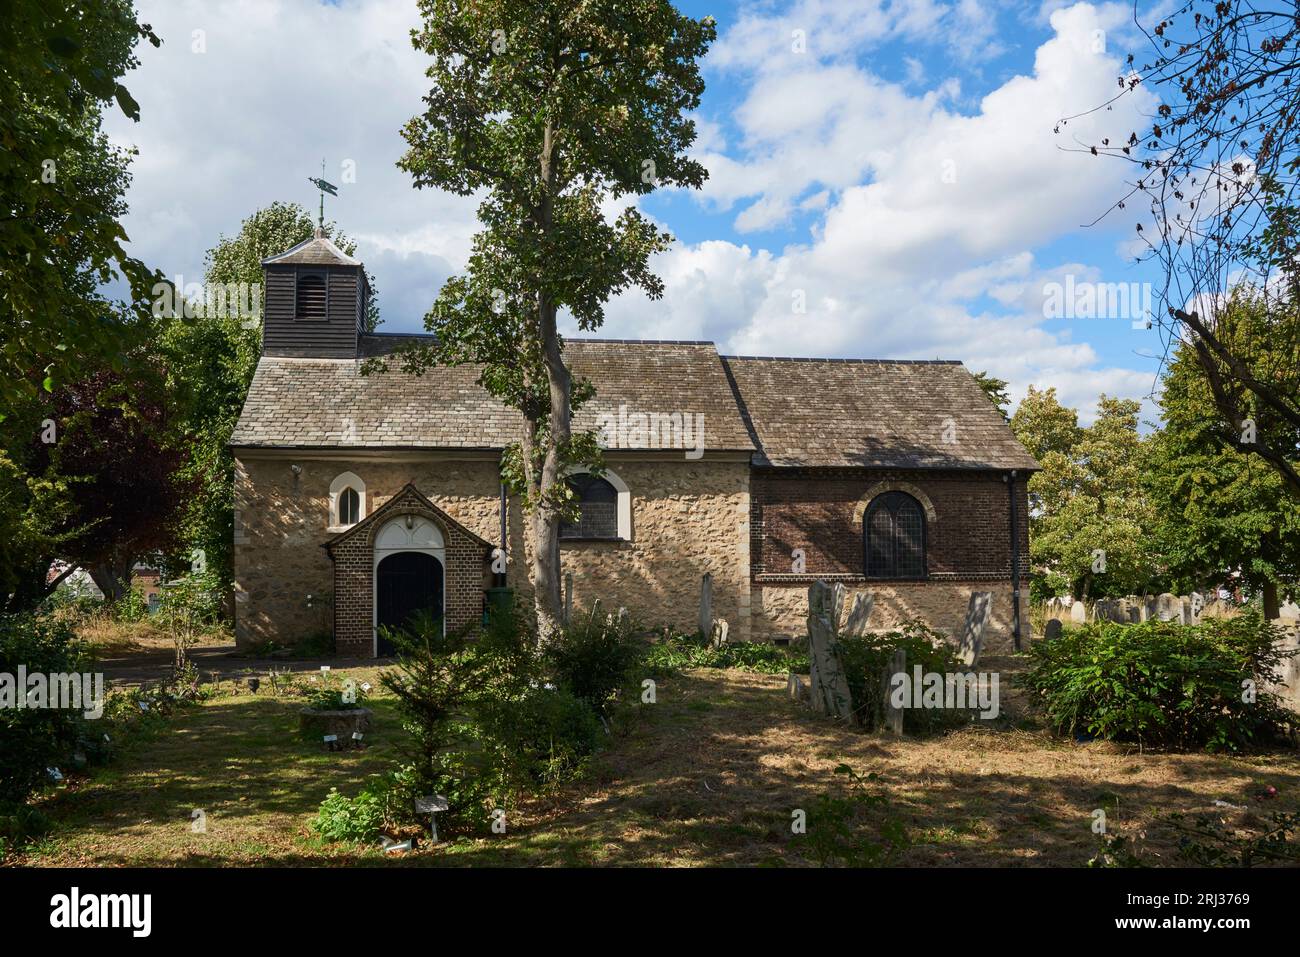 The 12th century Grade I listed church of St Mary the Virgin at Little Ilford, East London UK Stock Photo